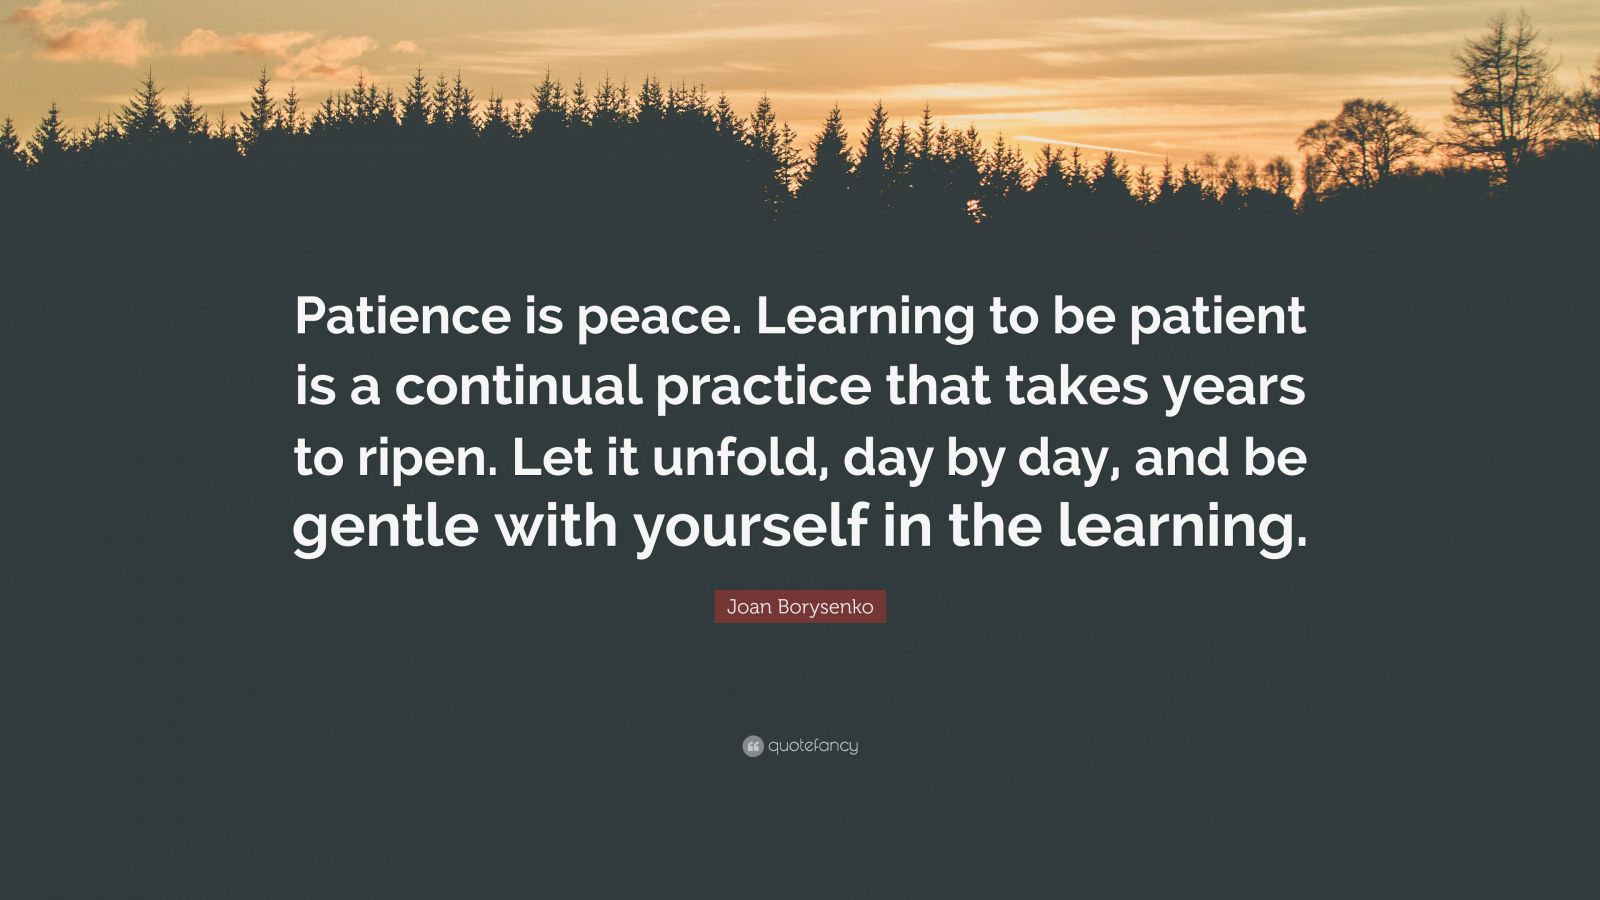 Joan Borysenko Quote: “Patience is peace. Learning to be patient ...